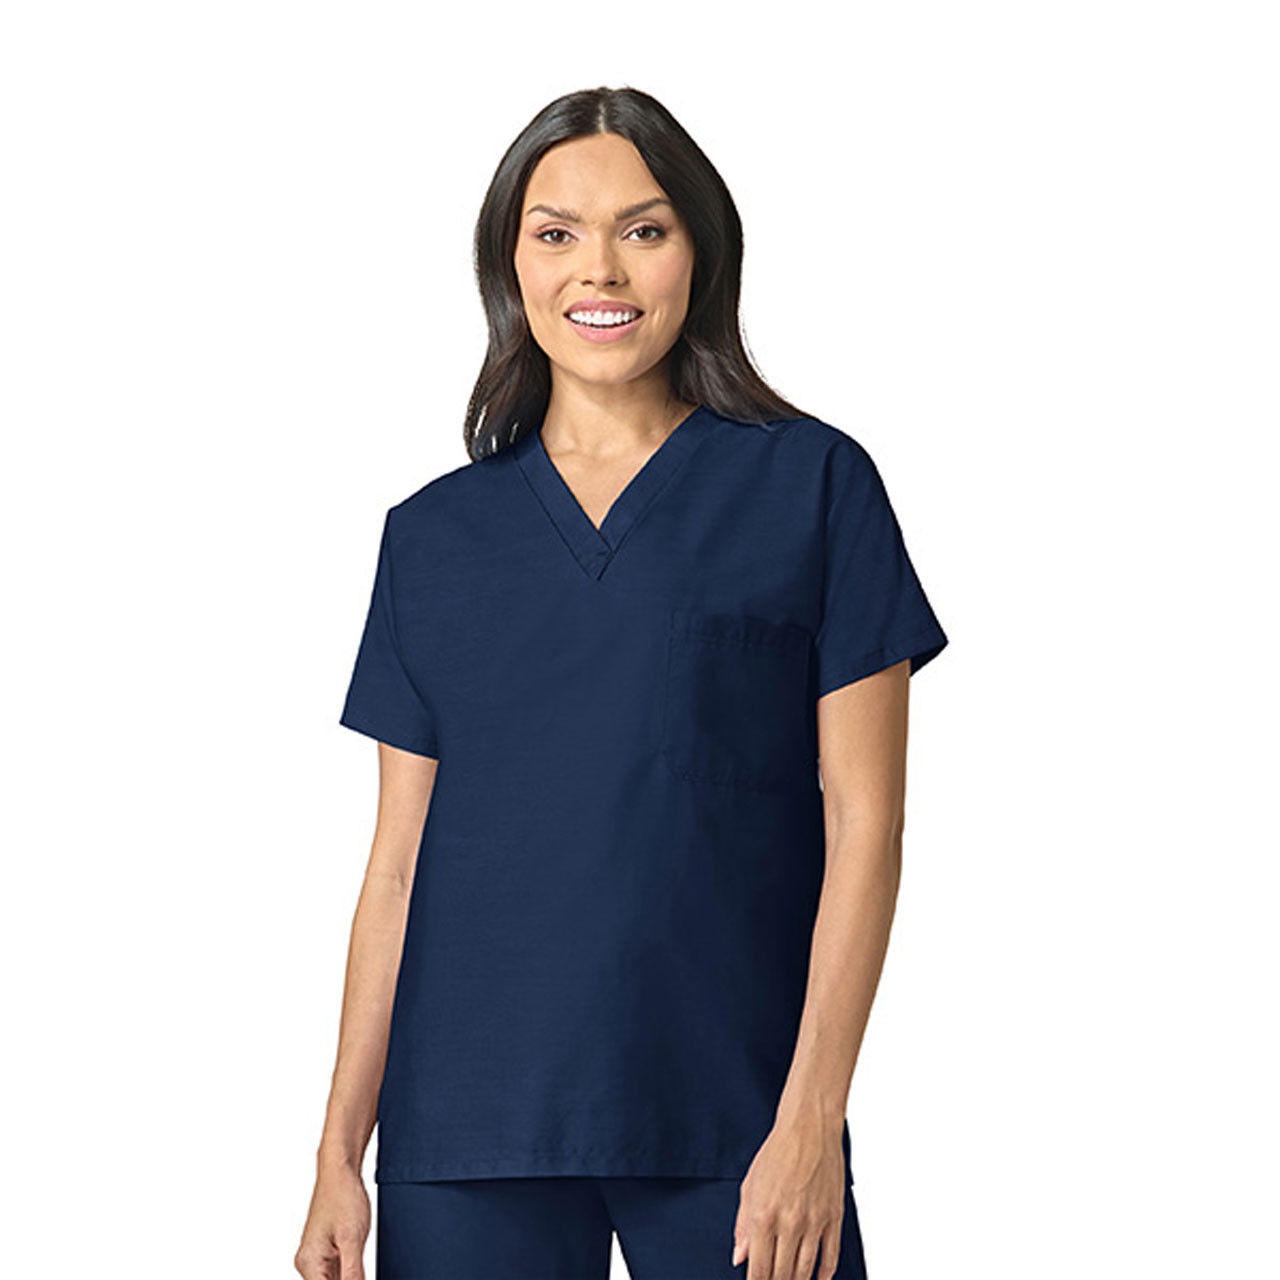 Does the V Neck Scrub Top have pockets for storing items?